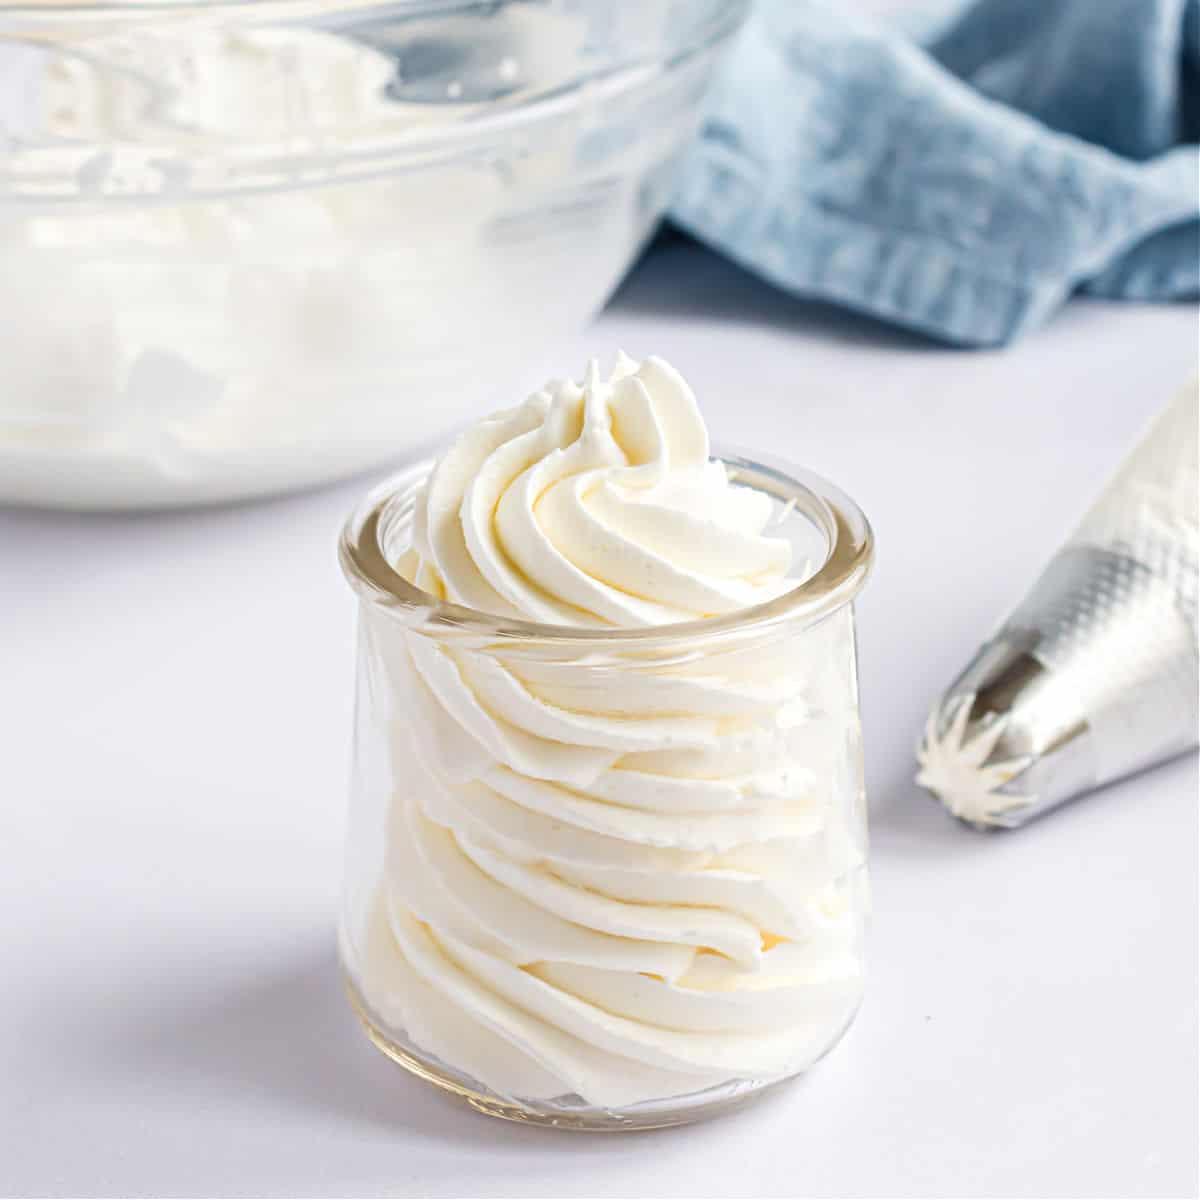 Stabilized Whipped Cream - Shugary Sweets